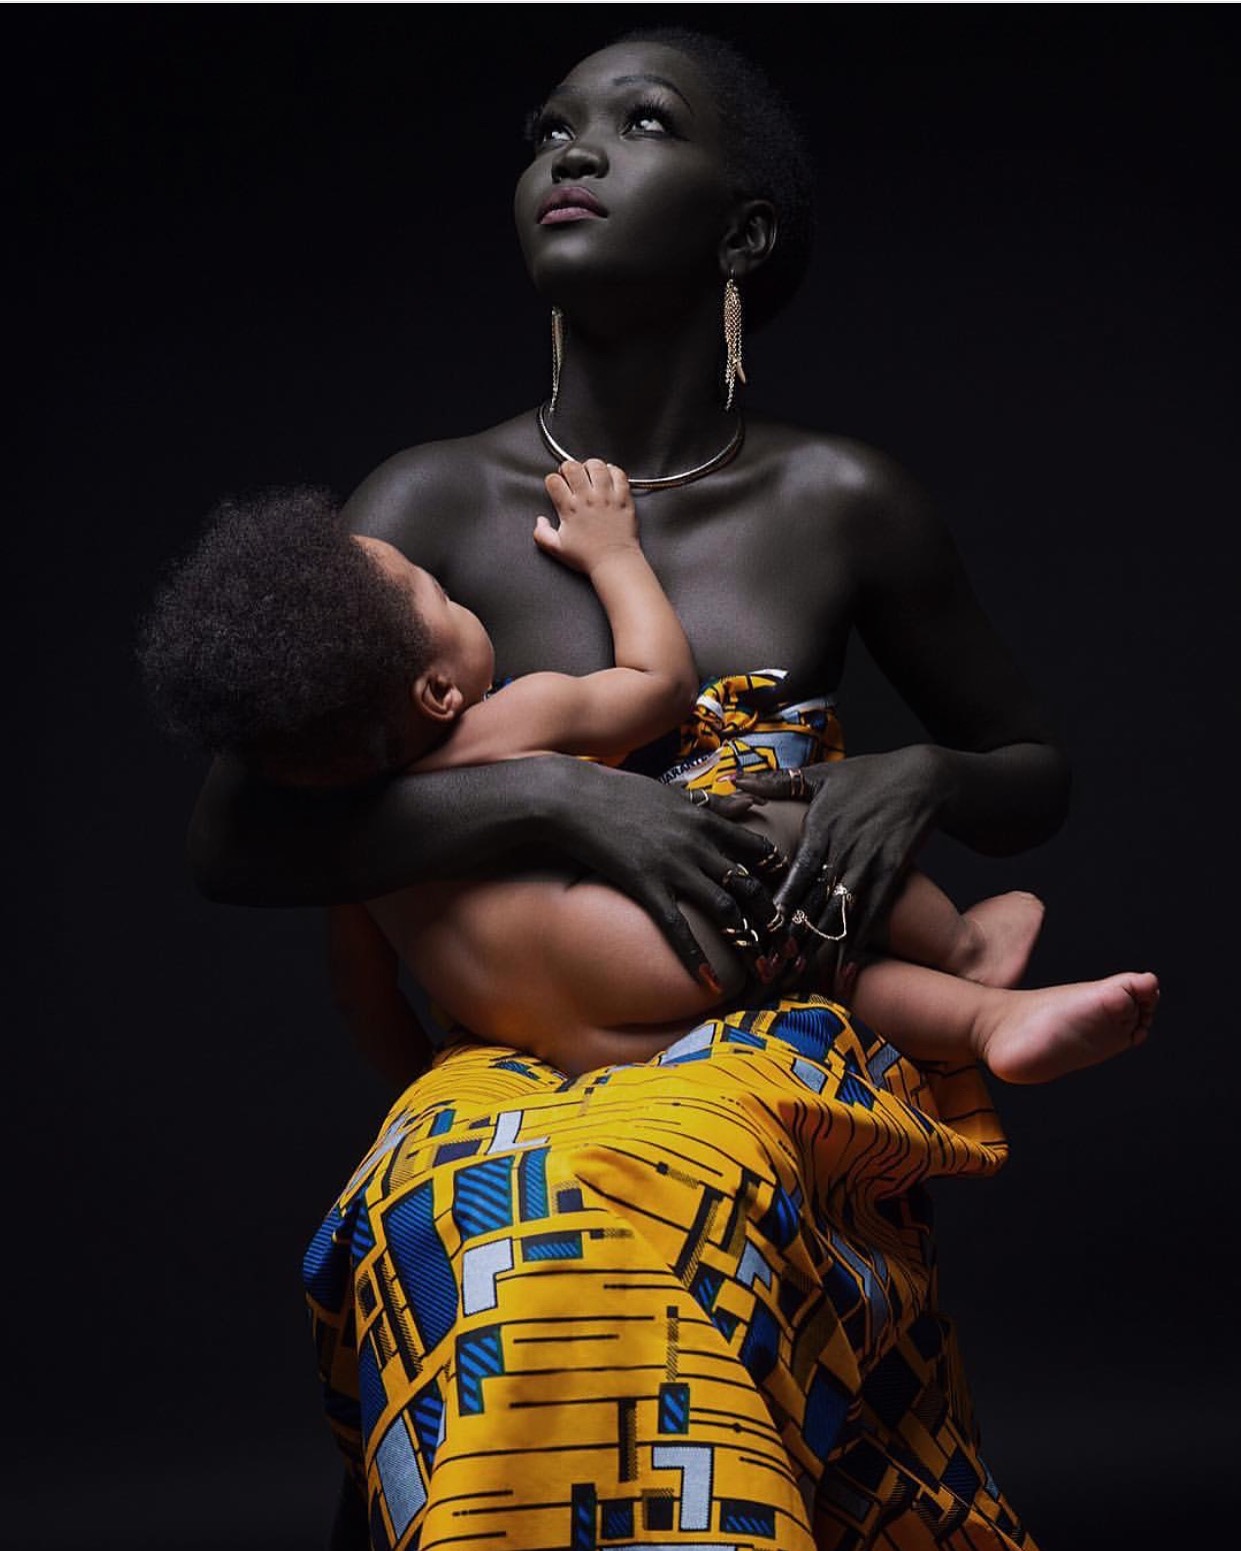 Pic of the day stunning photo of sudanese model nyakim gatwech holding a cute baby